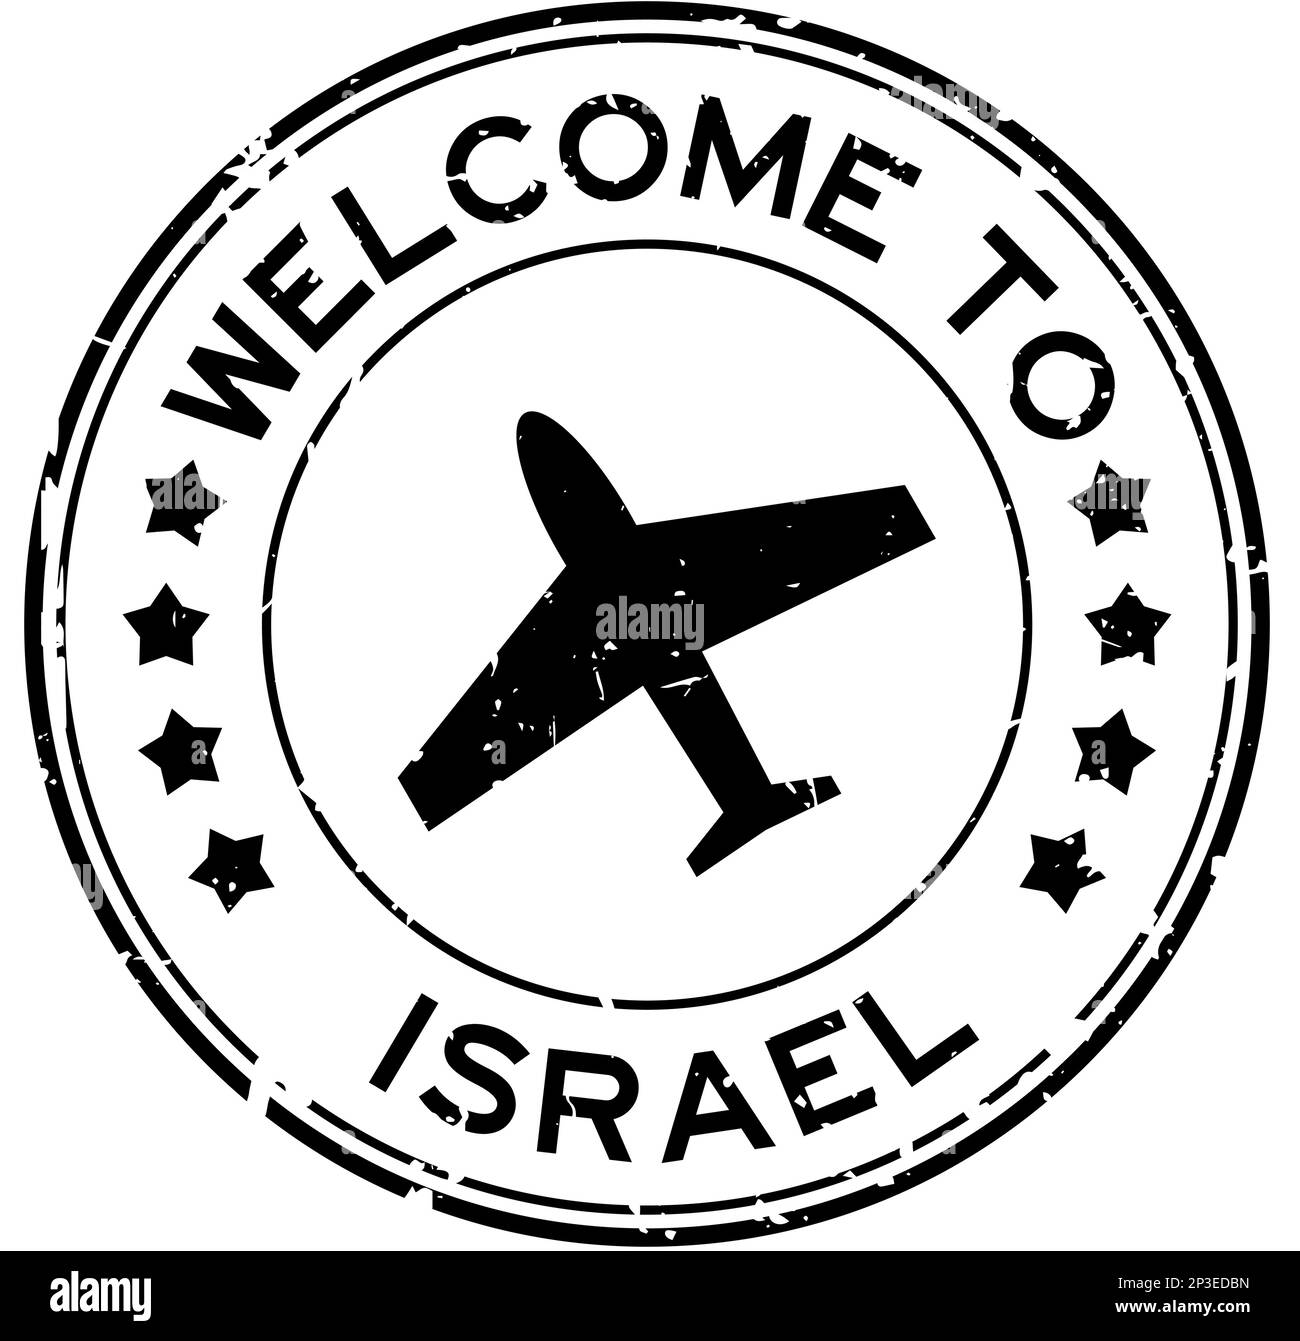 Grunge black welcome to israel with airplane icon round rubber seal stamp on white background Stock Vector